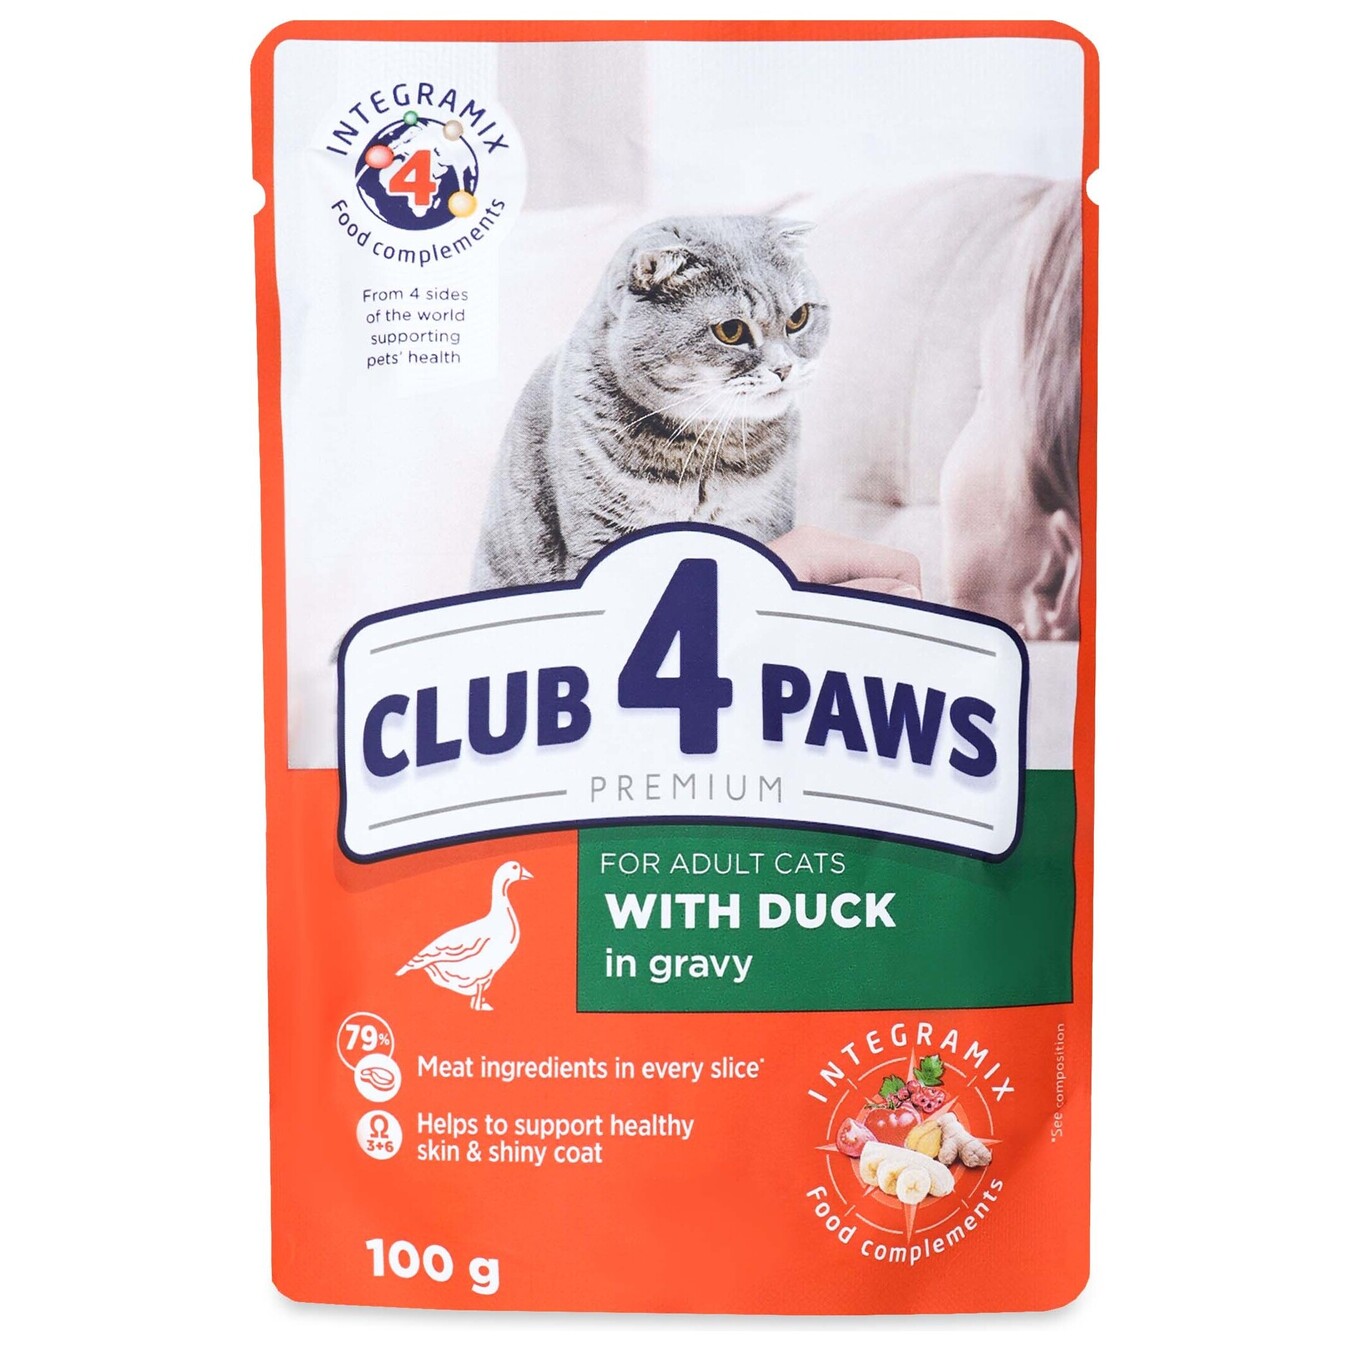 Club 4 paws premium feed with duck in sauce for adult cats 100g